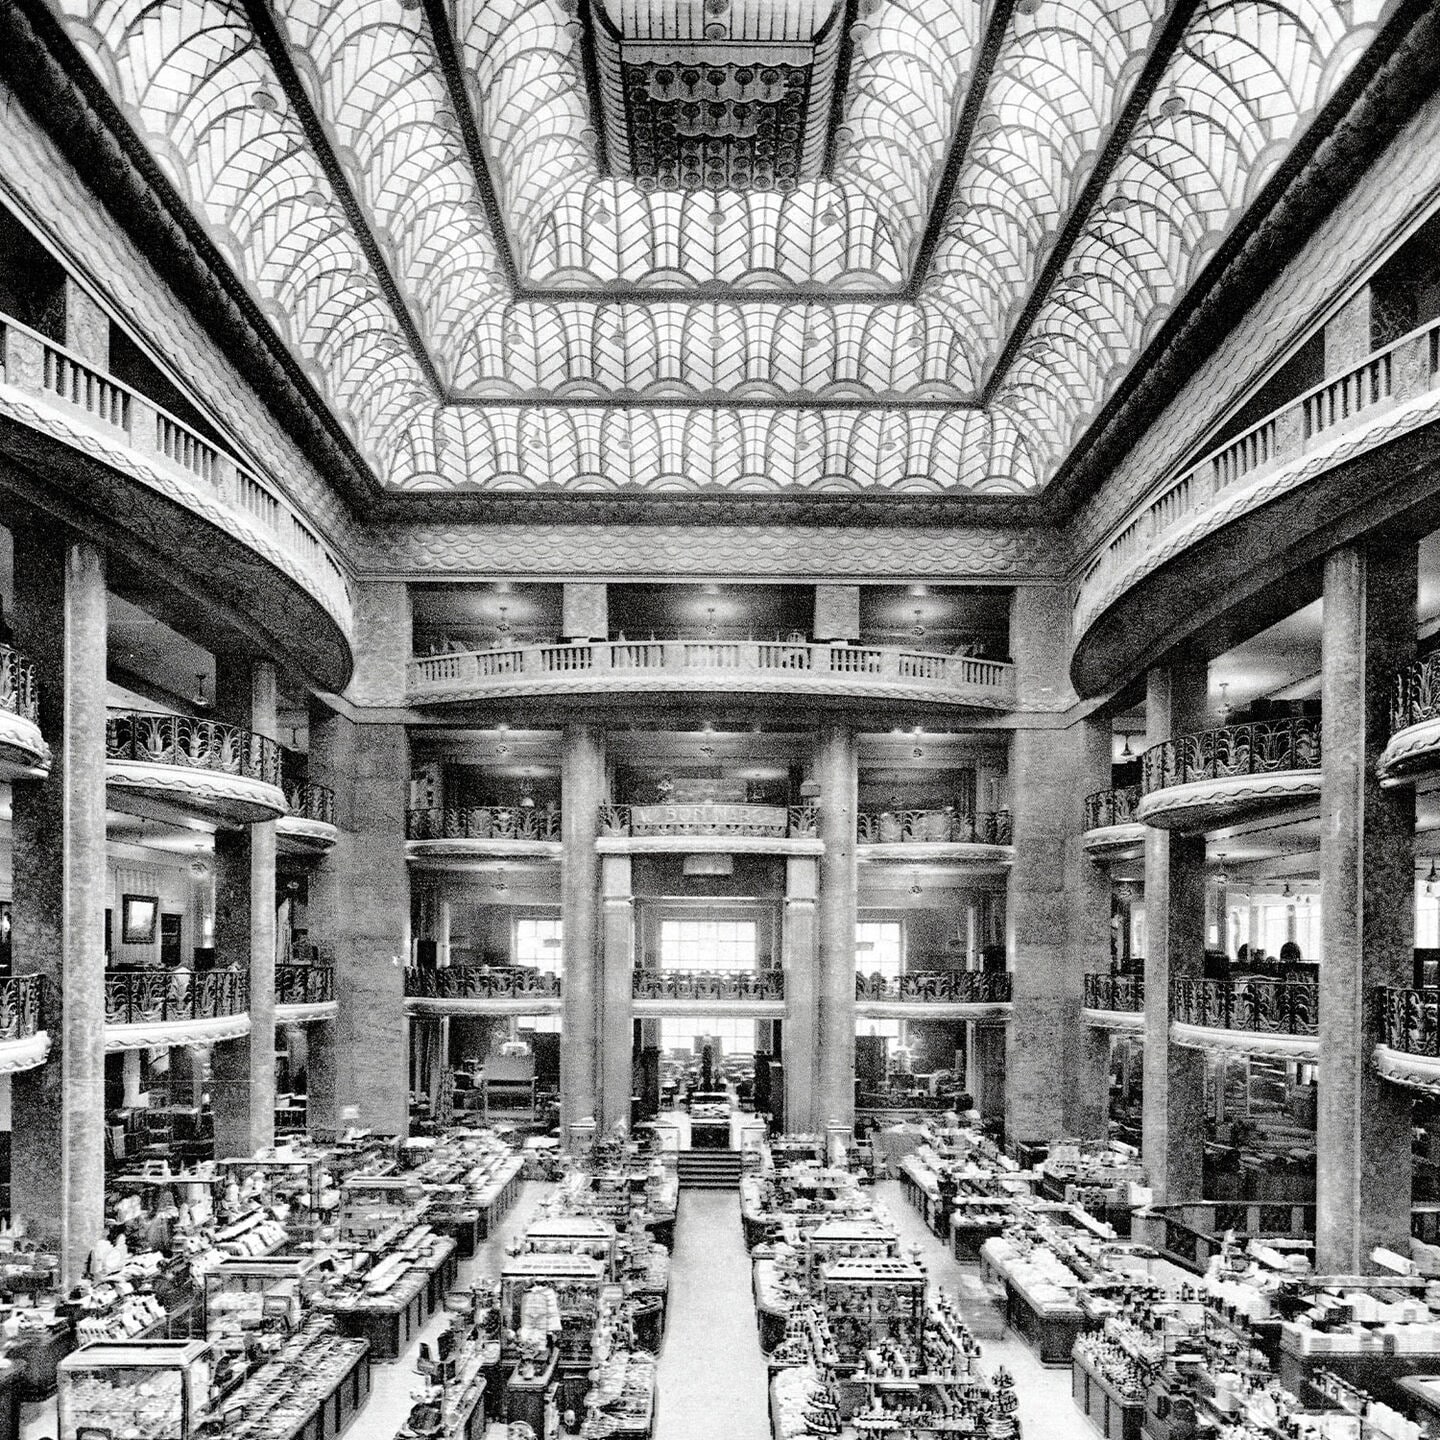 Inside the Le Bon Marché of many years ago